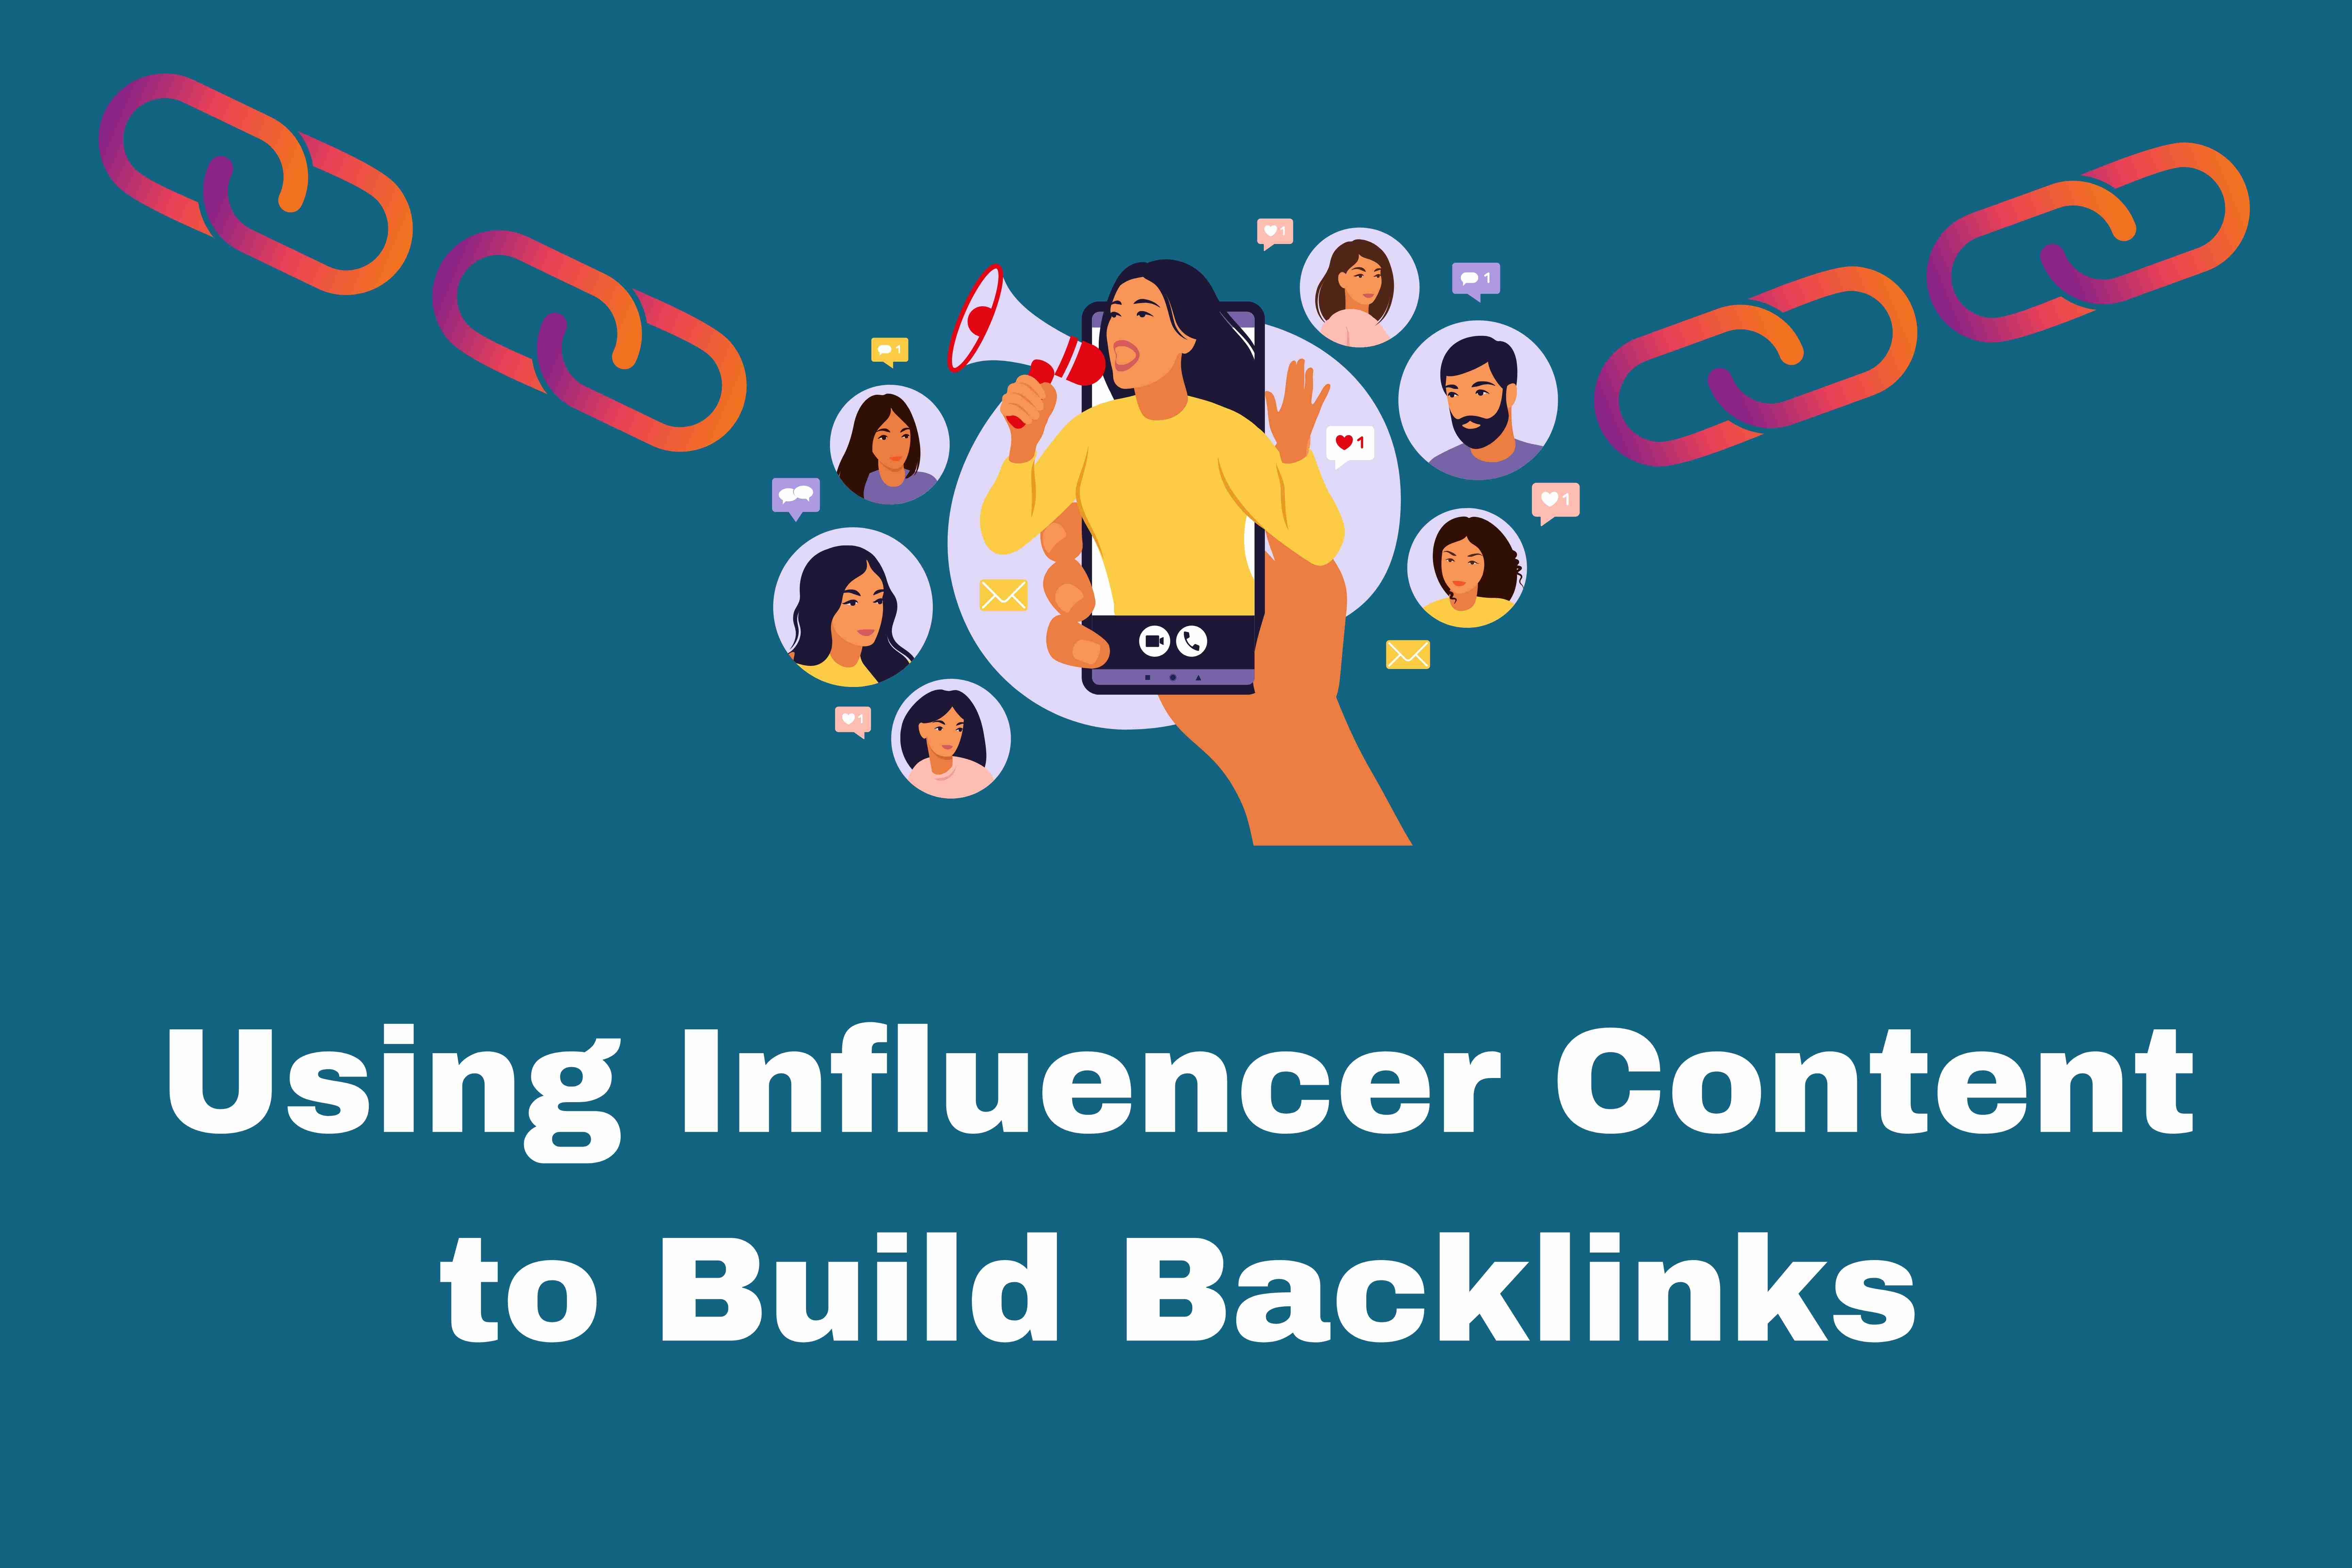 Using Influencer Content to Build Backlinks